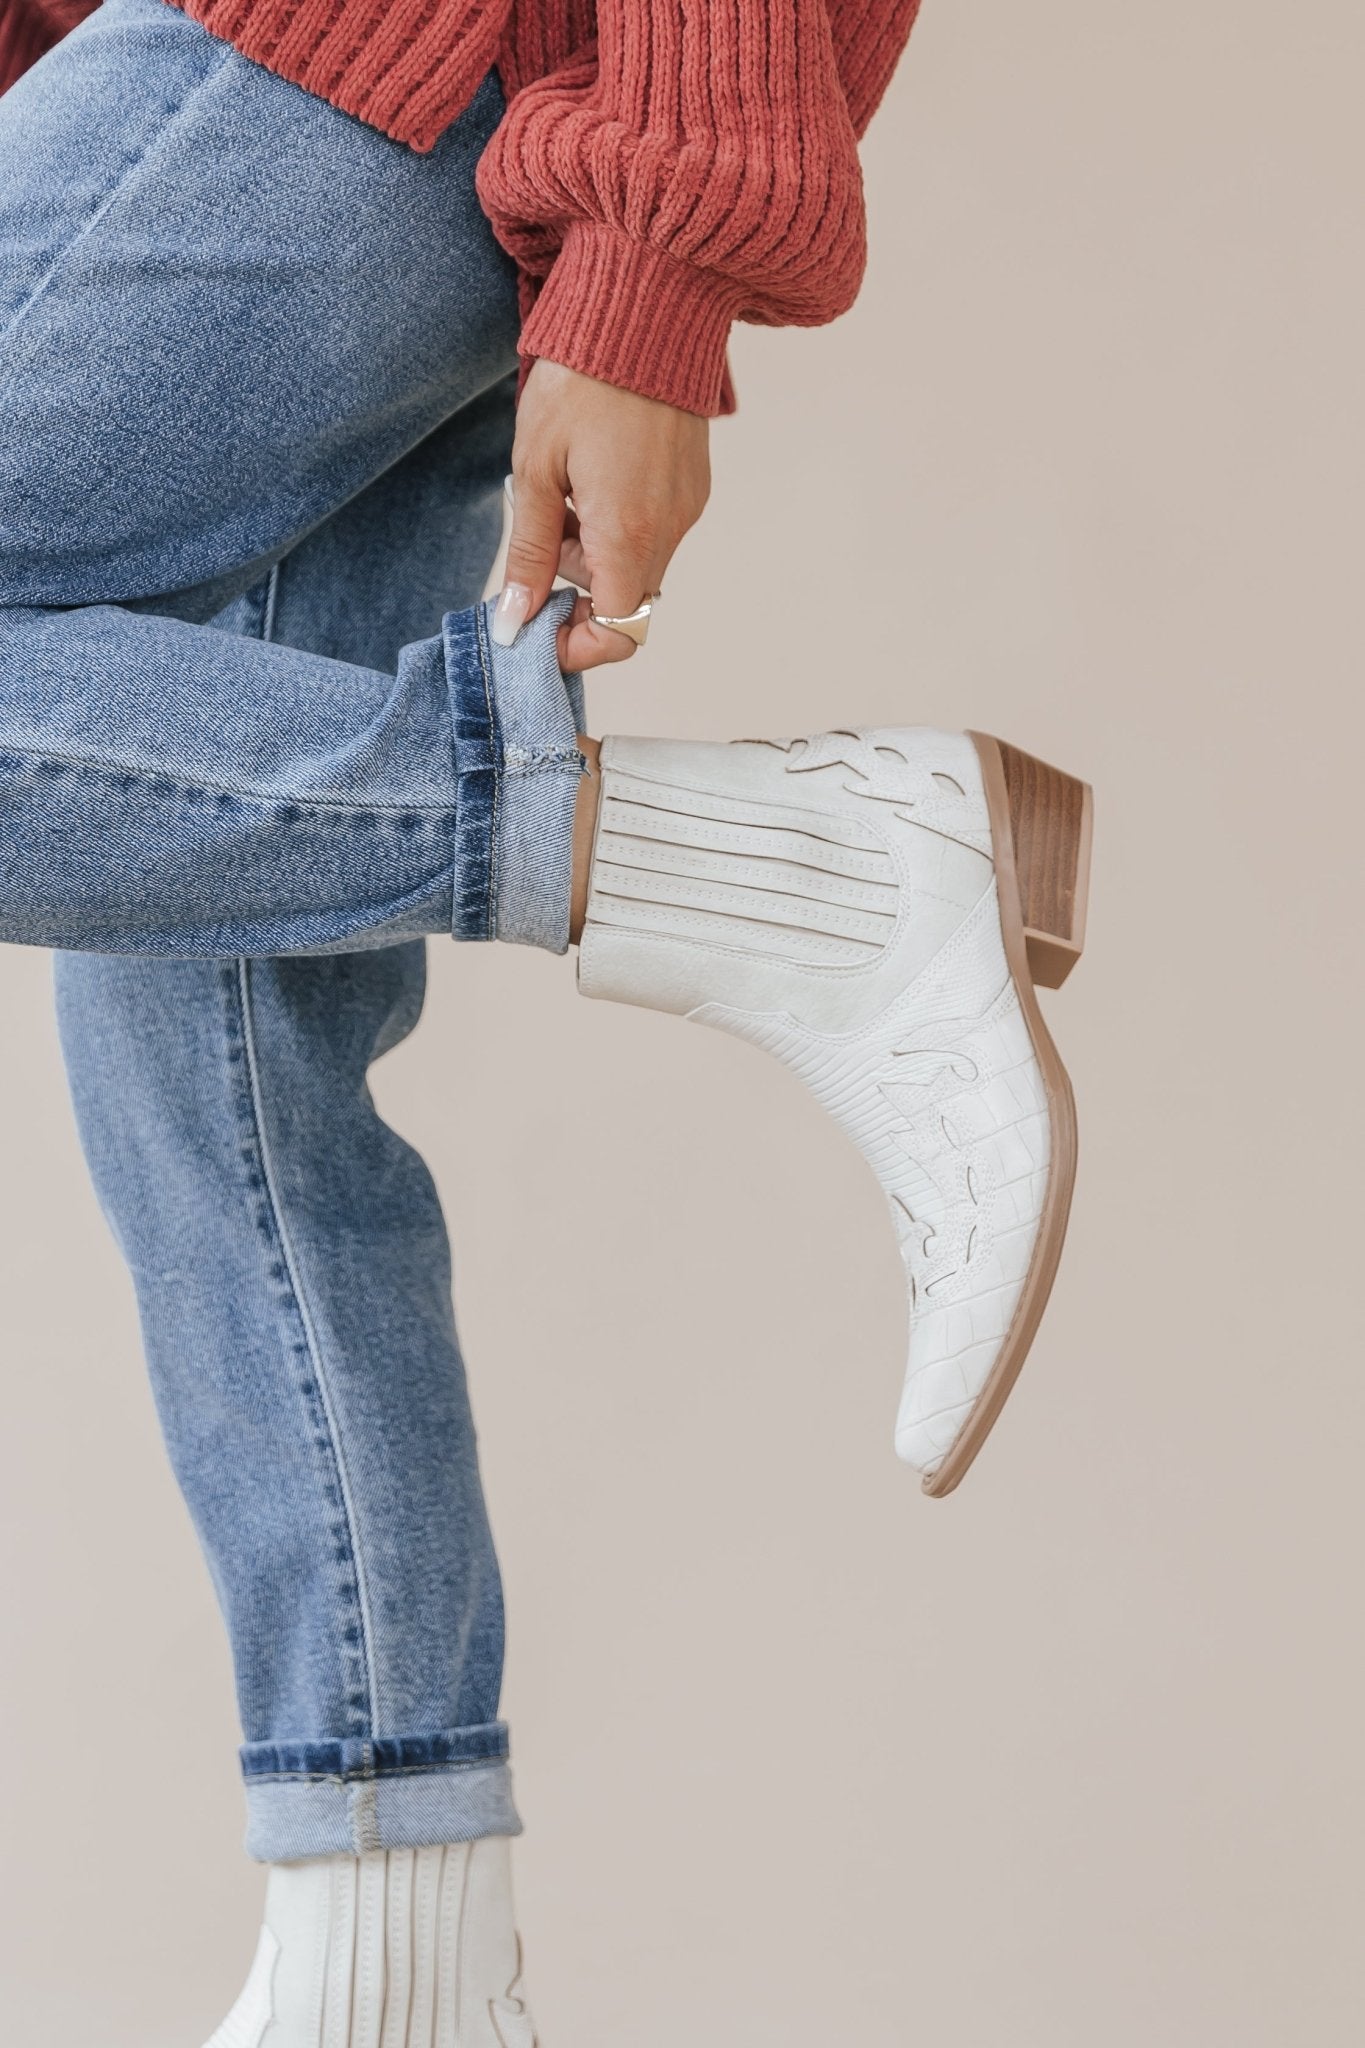 Coconuts By Matisse Milo Ivory Western Booties - Magnolia Boutique